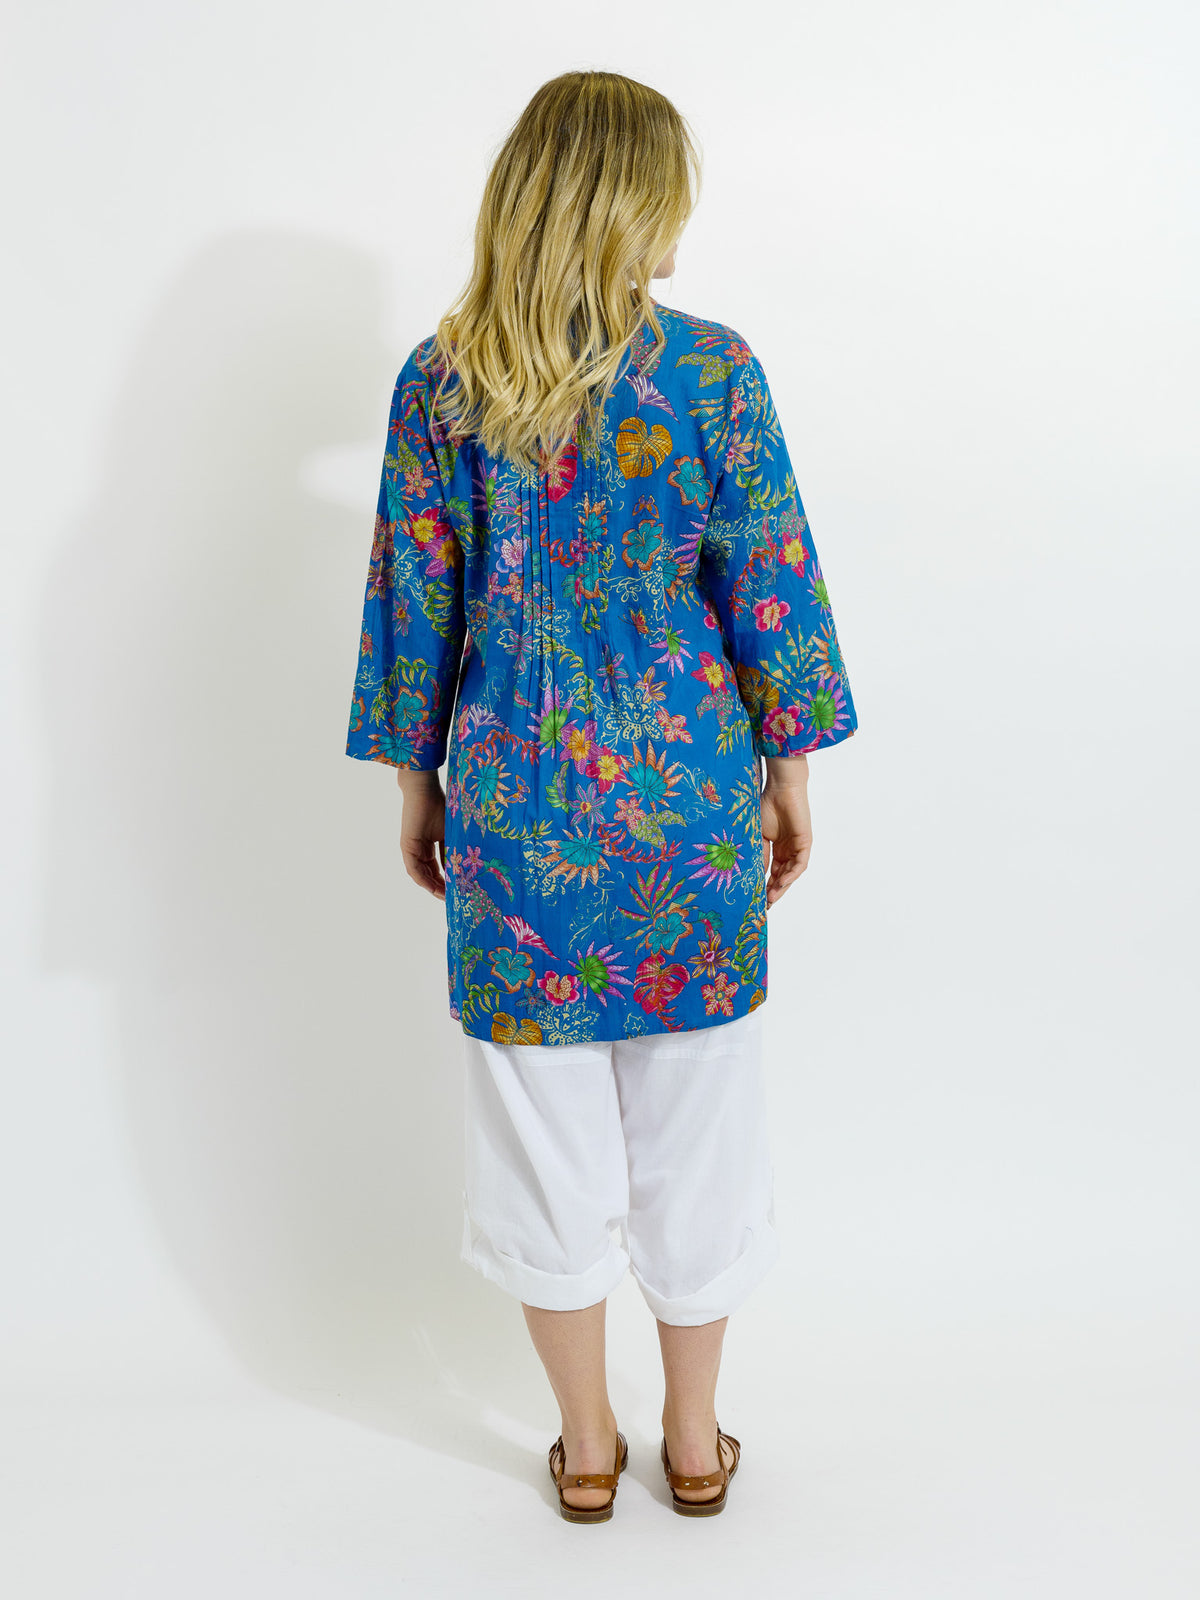 Tully Top in Royal Blue Floral